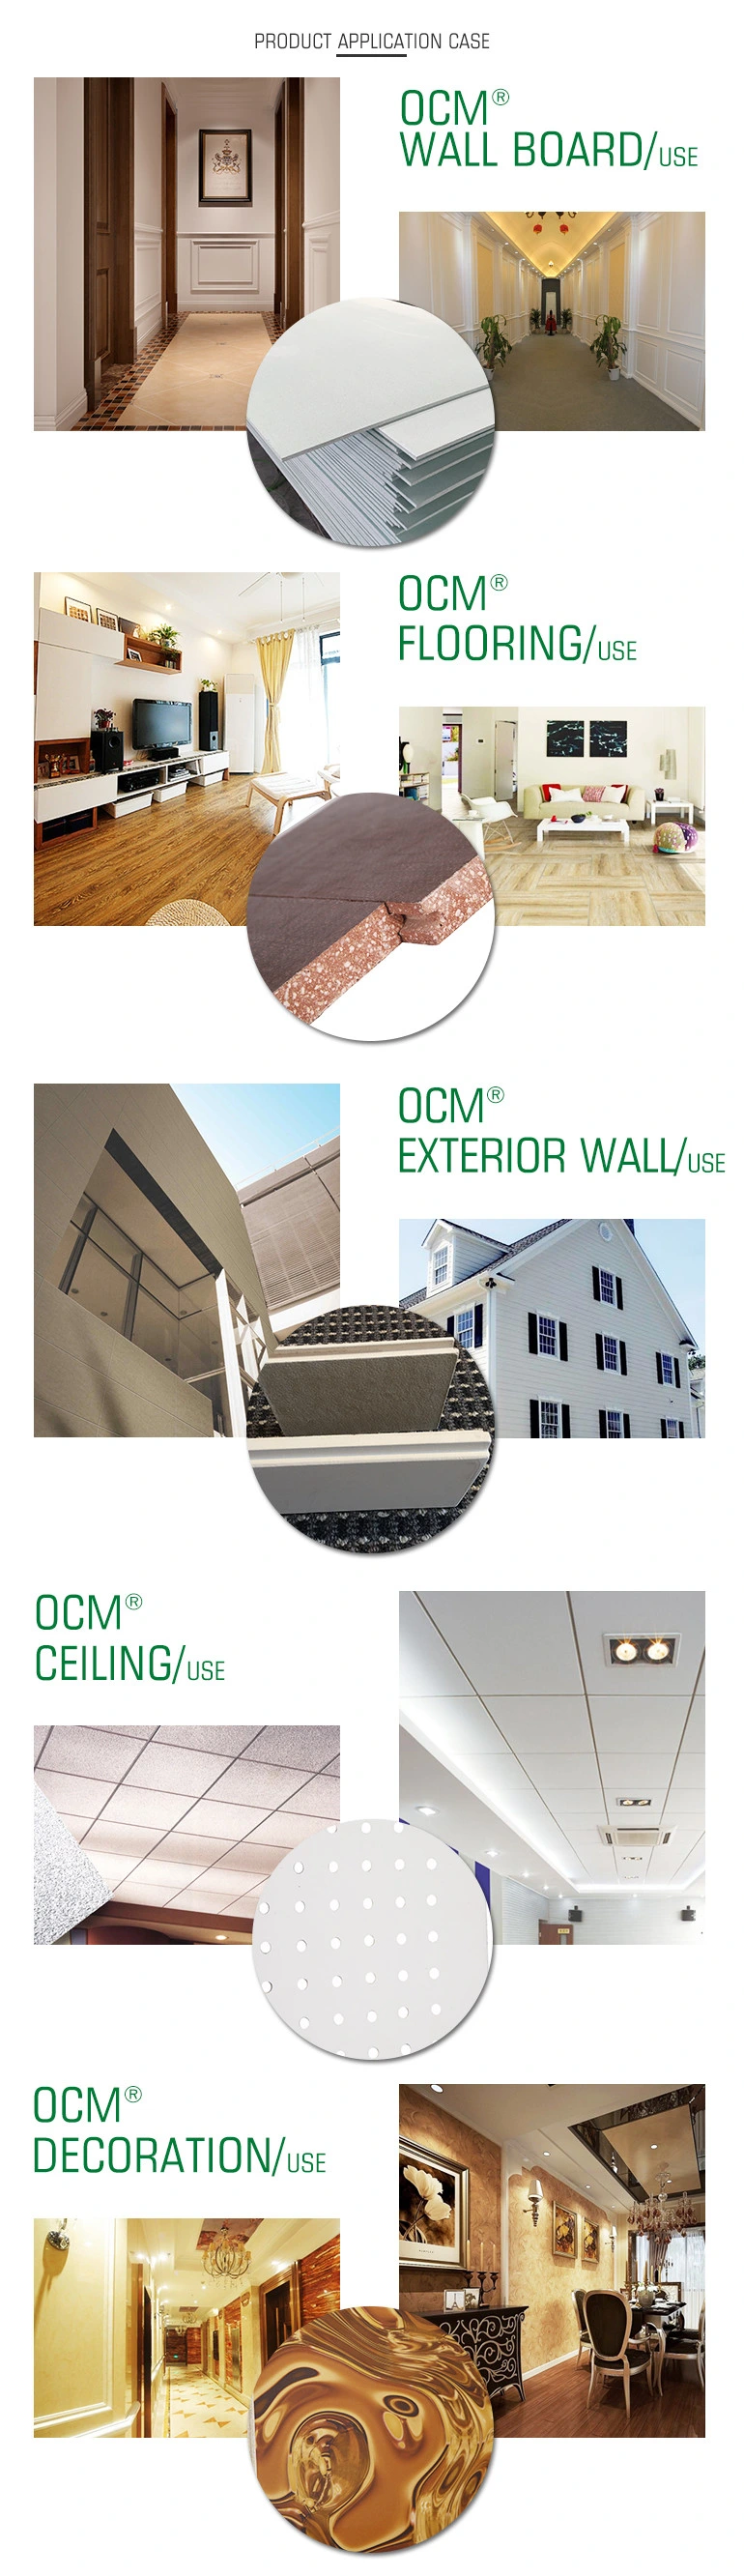 MGO Fireproof Decorative Board Magnesium Foam Board Ceiling Partition Board Fire Proof Wall Partition Board